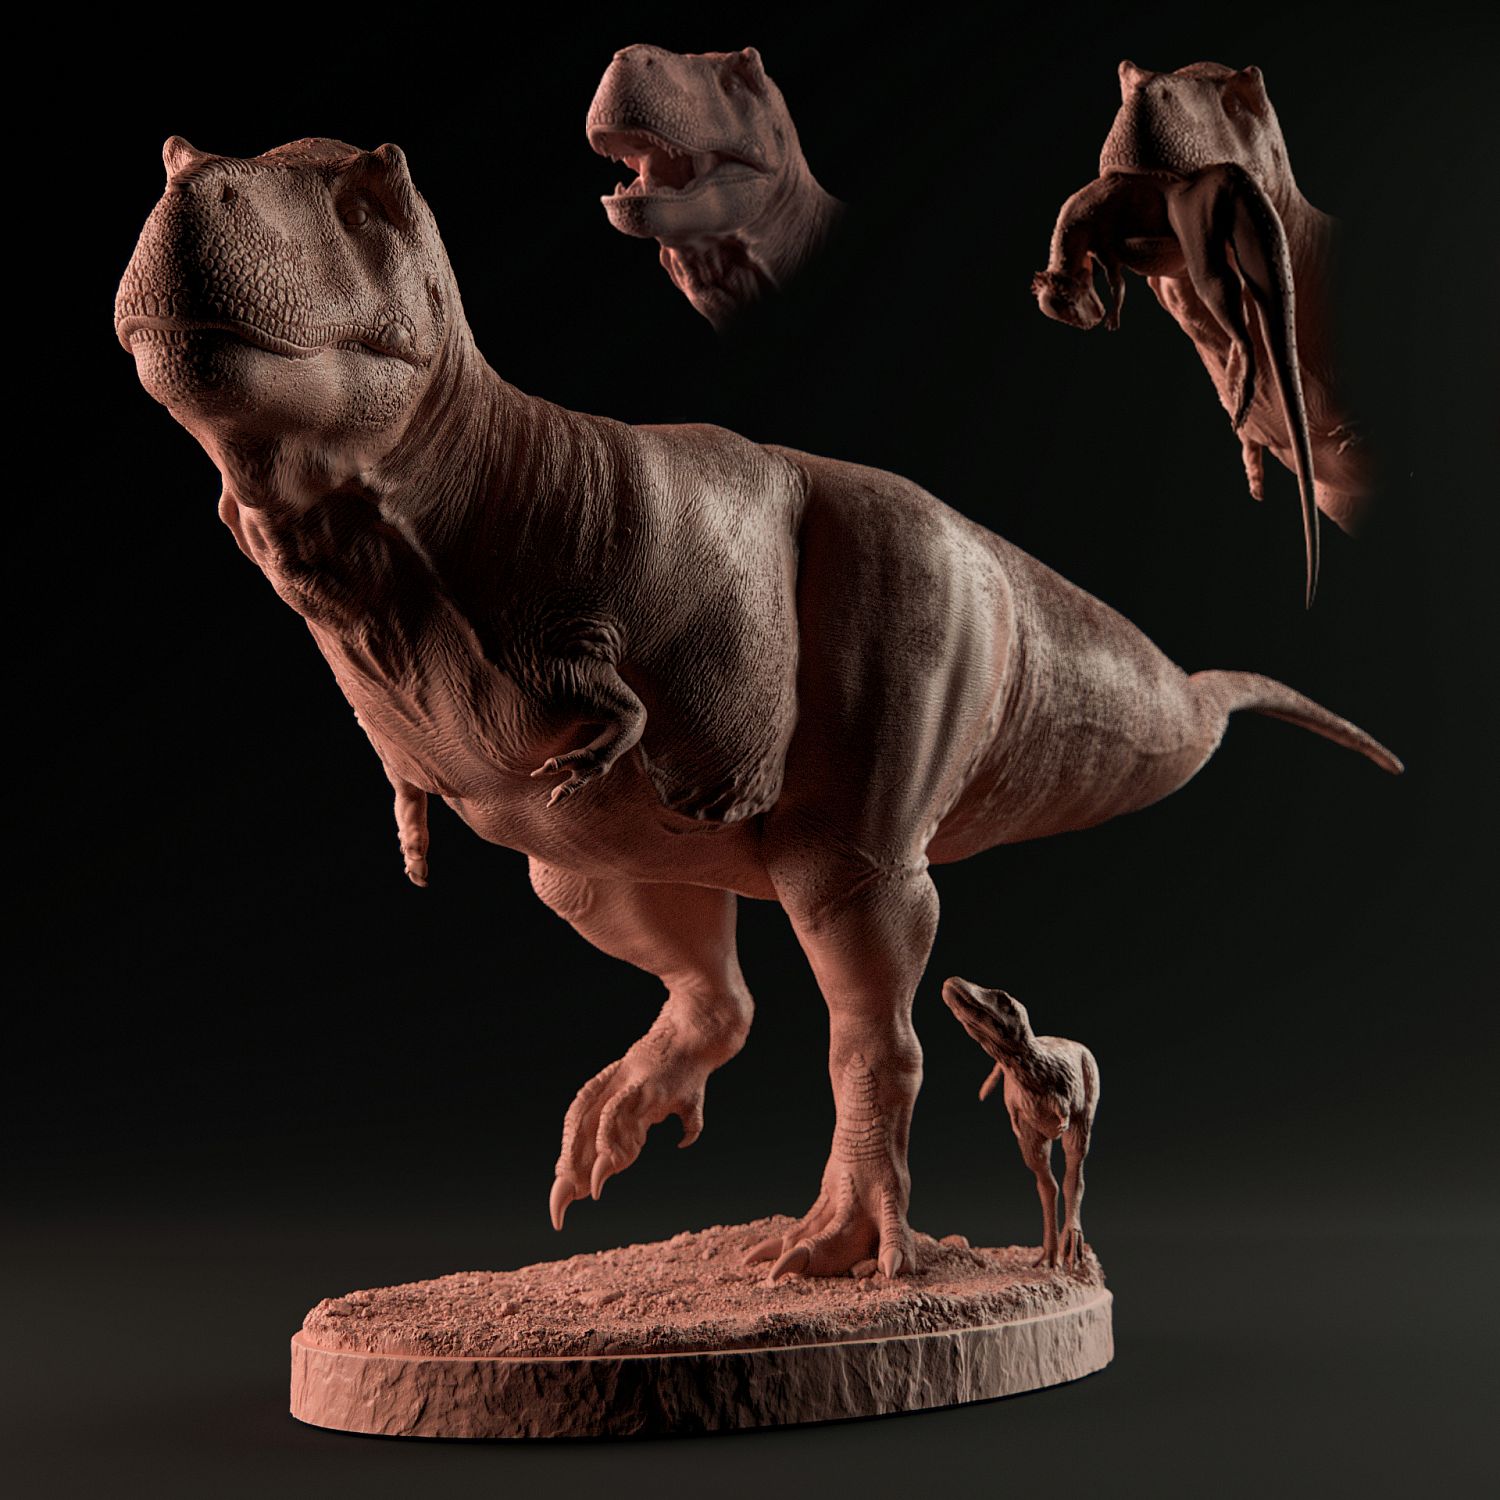 3D Printable Tarbosaurus vs Deinocheirus 1-35 scale pre-supported dinosaur  by Dino and Dog